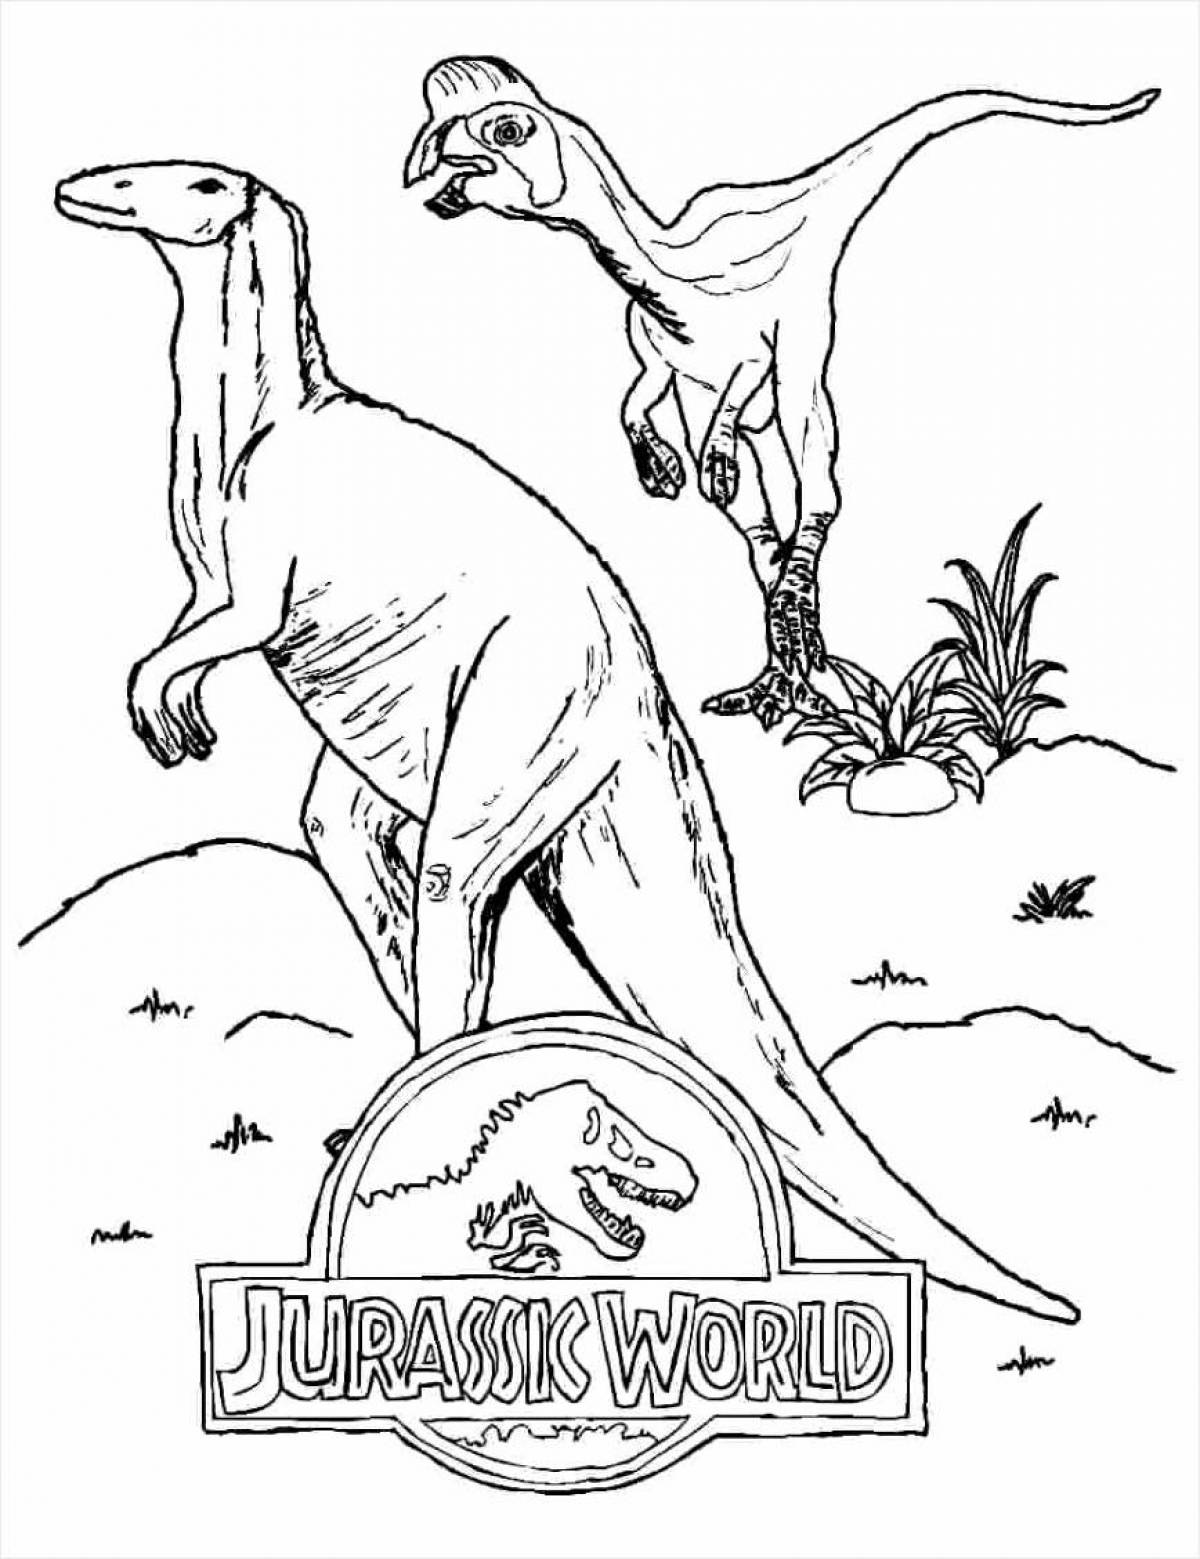 Glowing Jurassic World coloring page